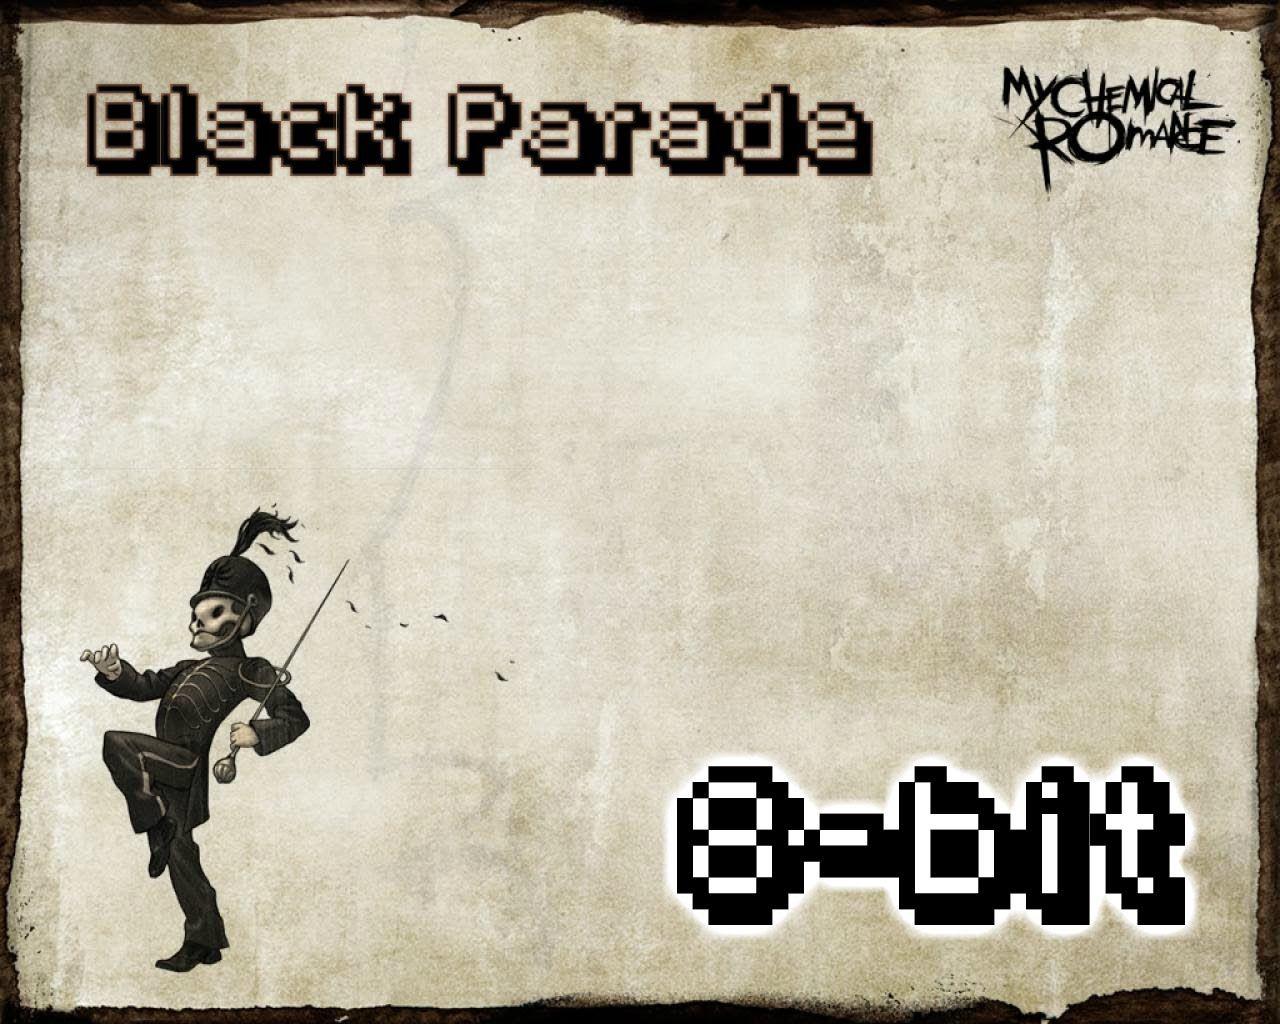 ♫My Chemical Romance to the Black Parade♫ 8 bit